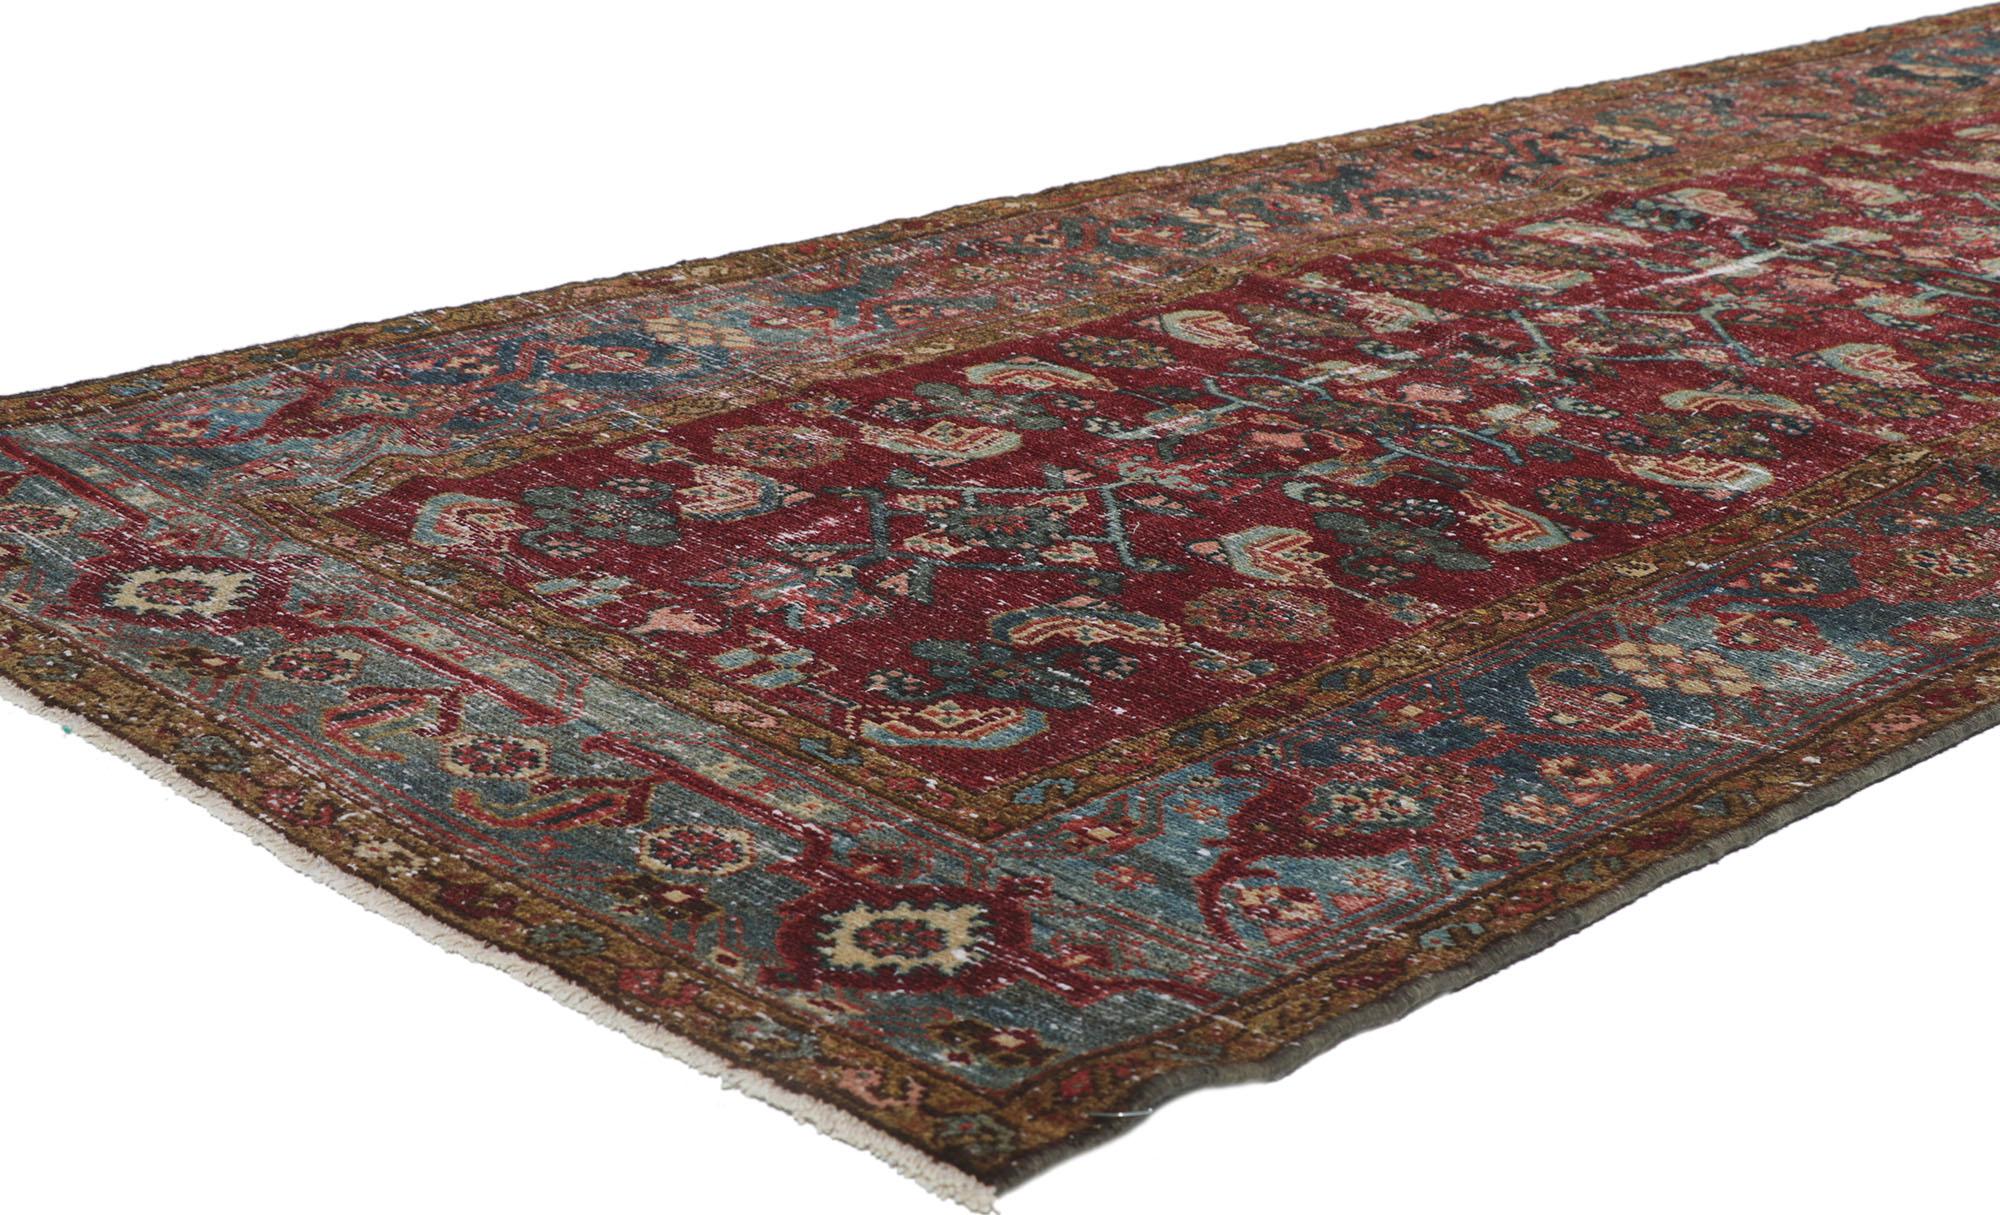 60975 Distressed Antique Persian Malayer Runner with Herati Pattern 03'05 x 14'10. With its rugged beauty and timeless design combined with rustic sensibility, this hand knotted wool distressed antique Persian Malayer runner will take on a curated